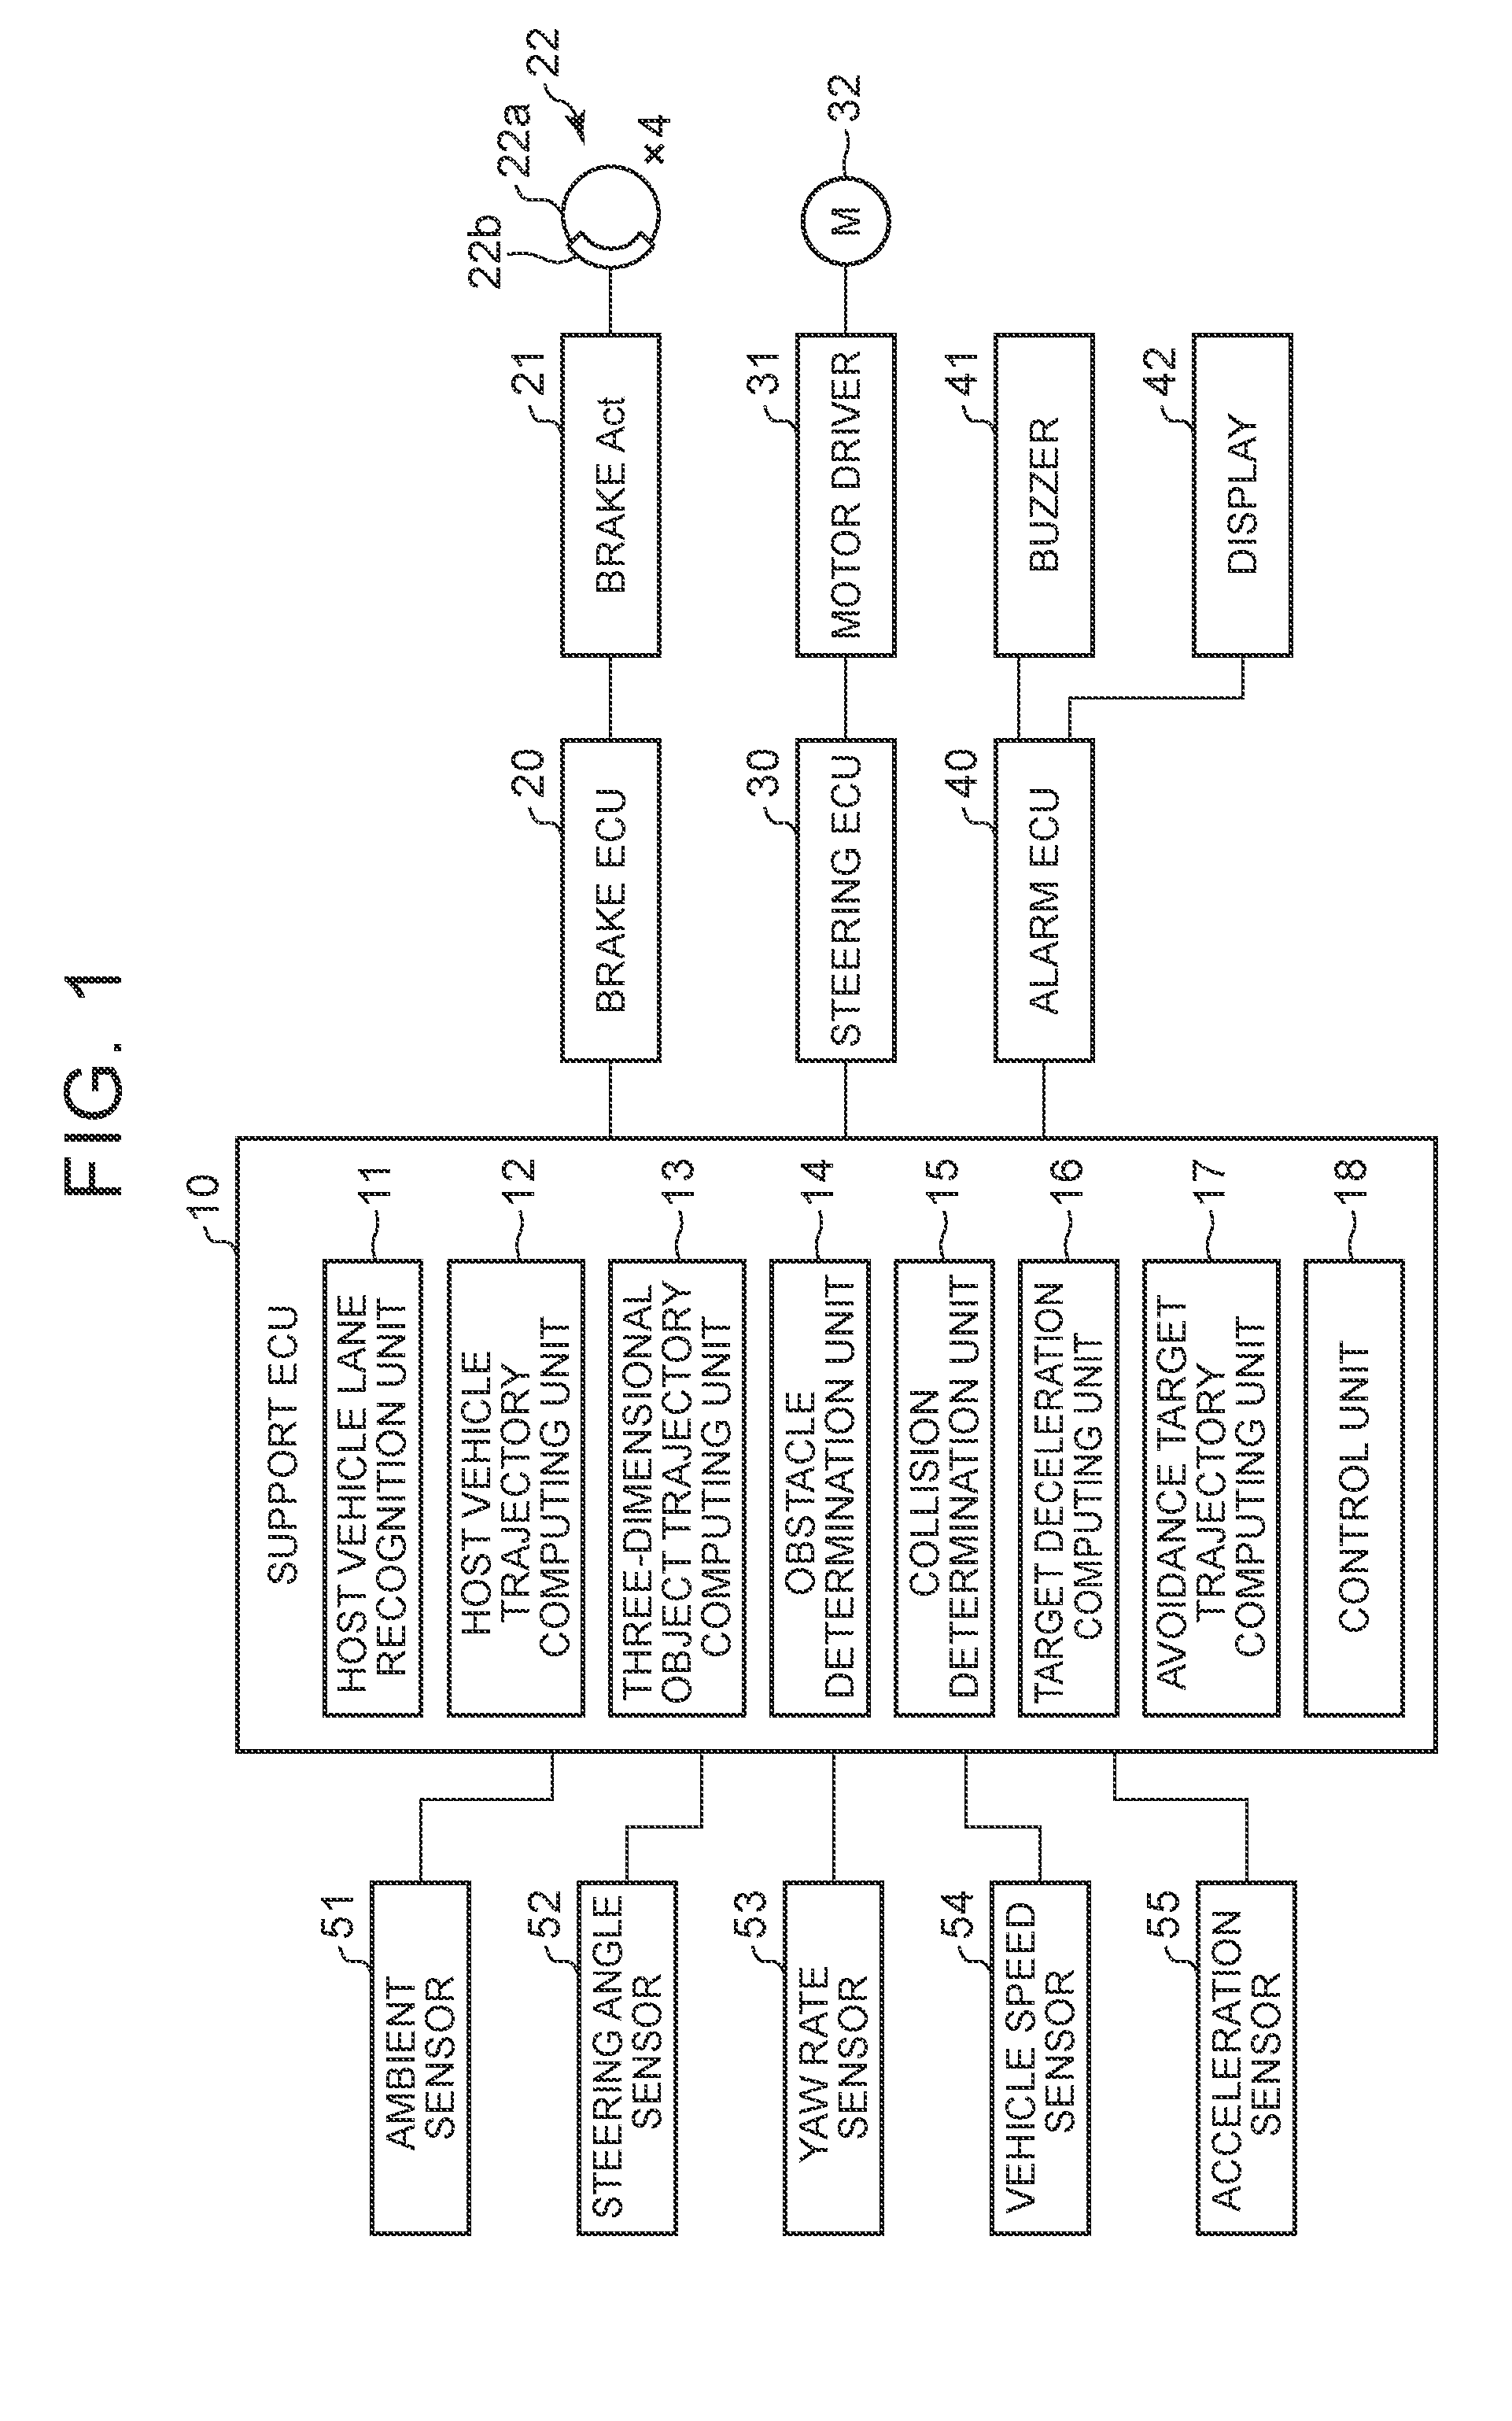 Collision avoidance support device